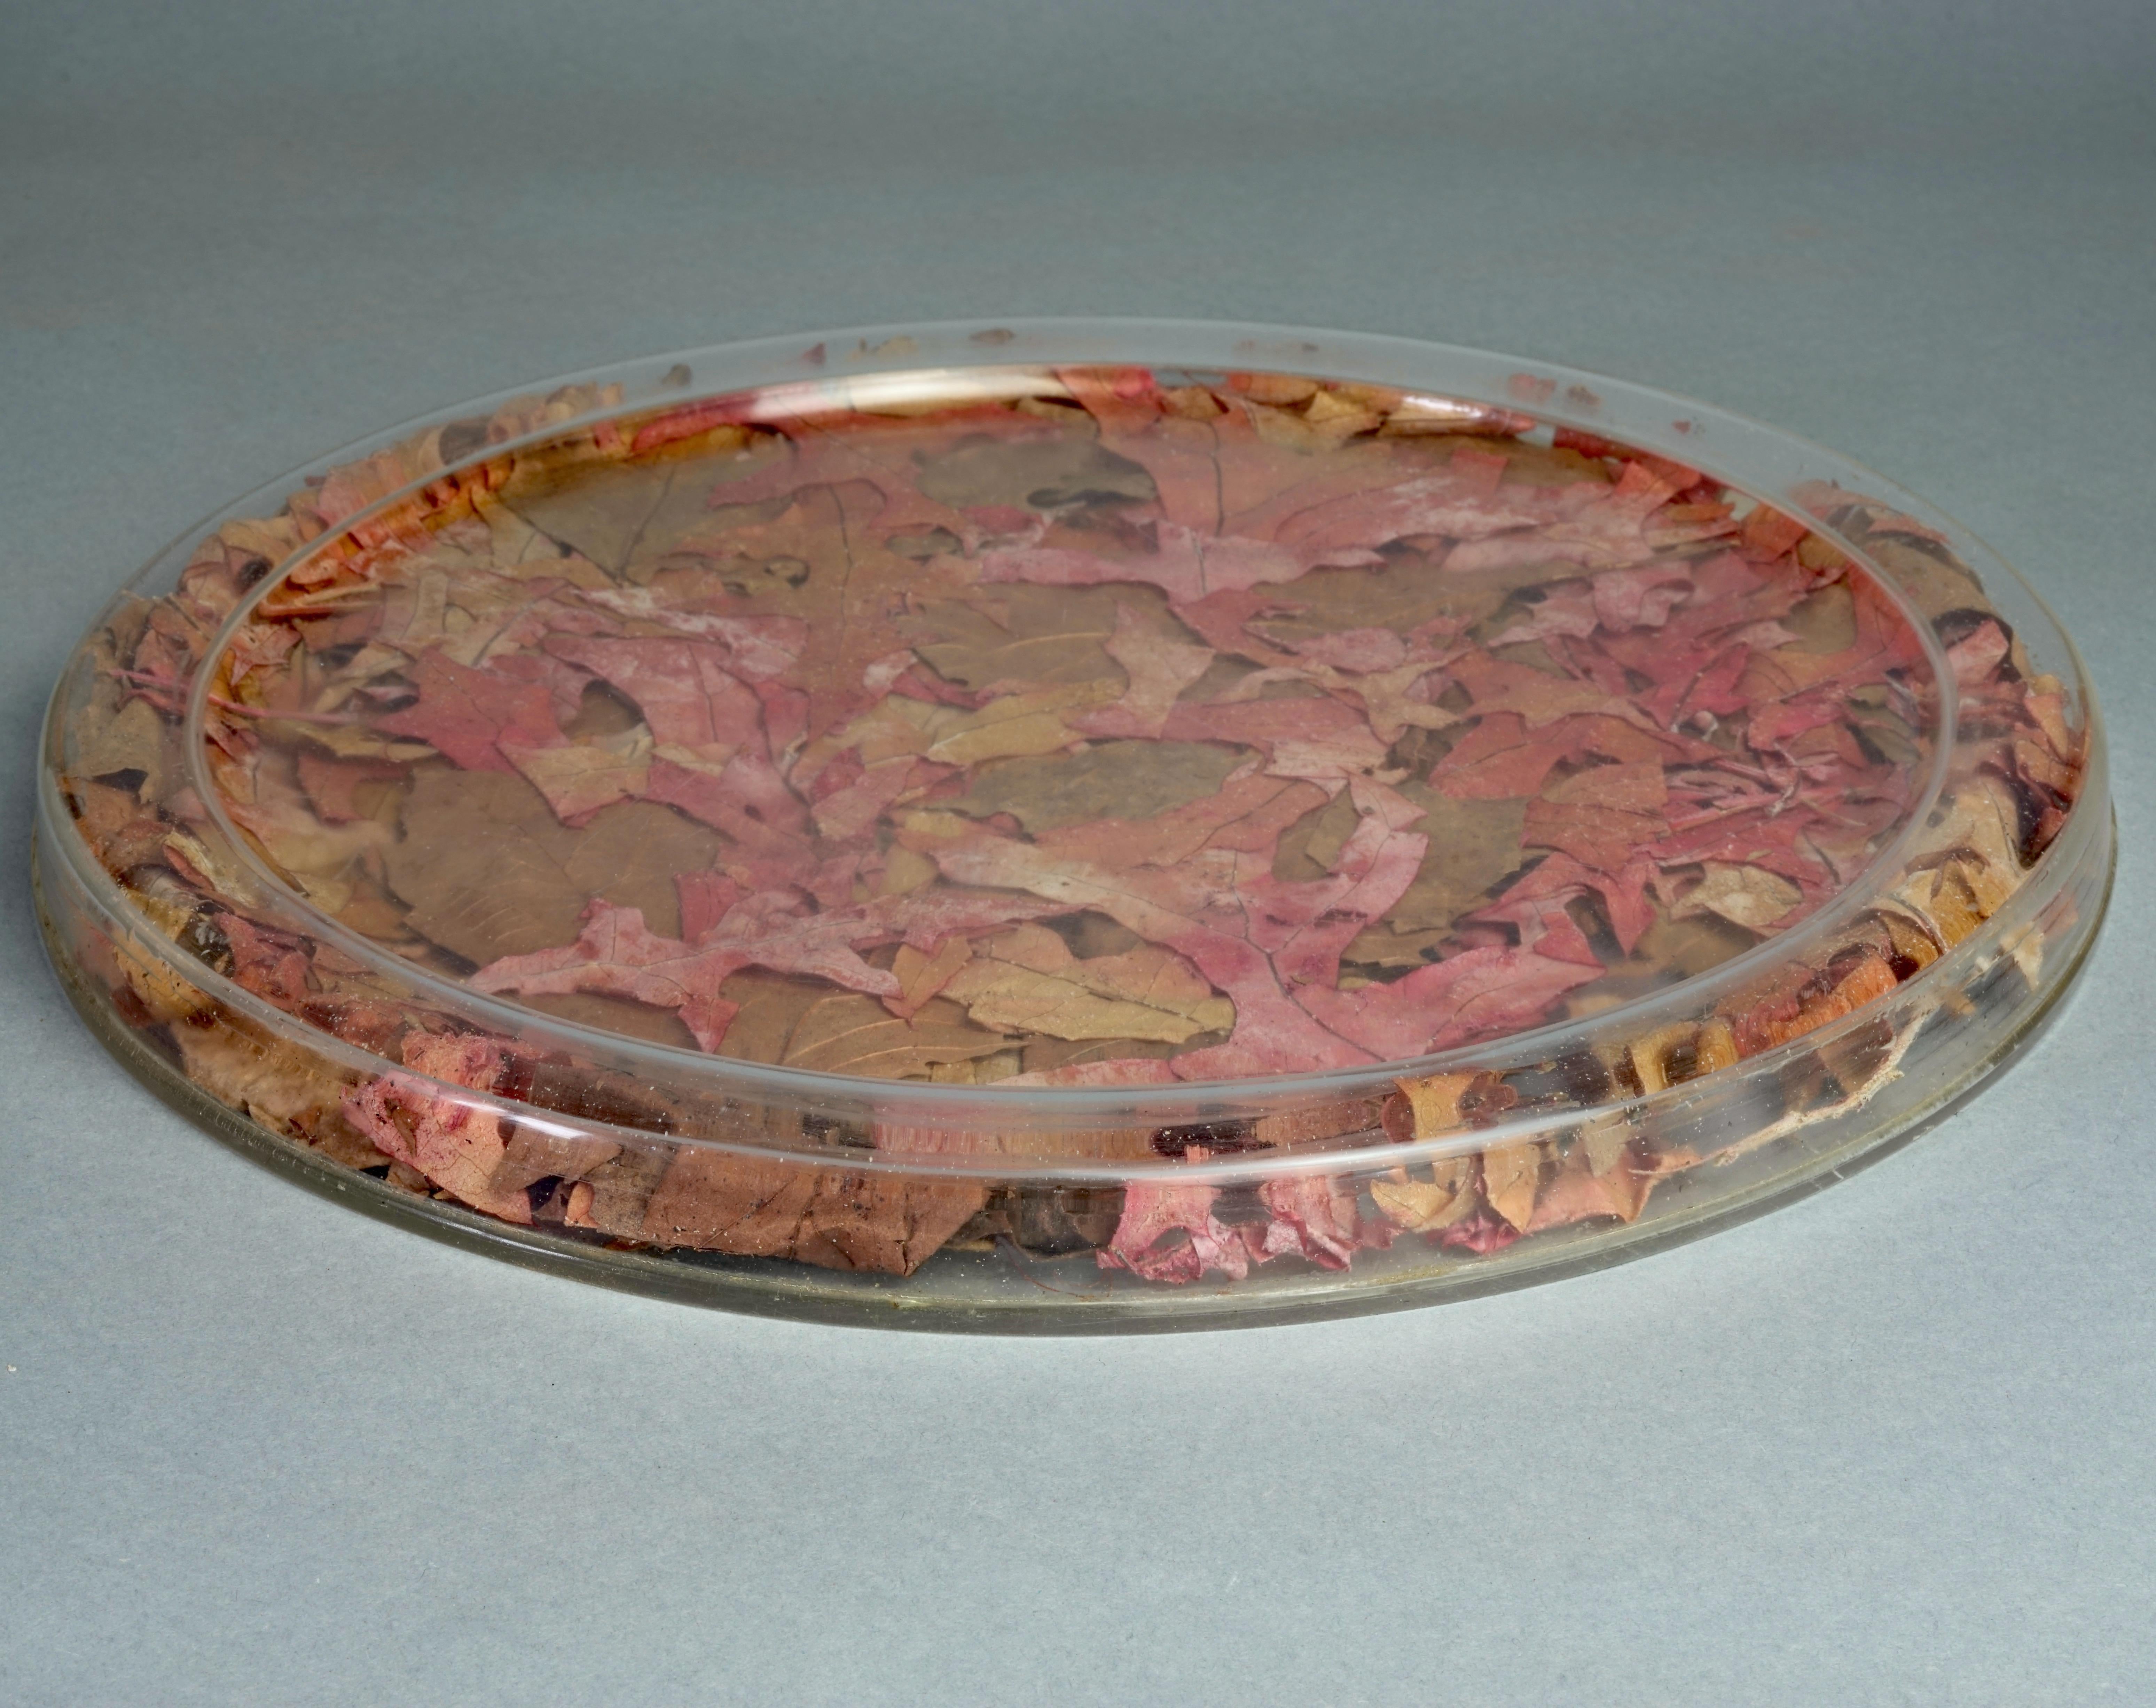 Vintage 1970s CHRISTIAN DIOR Autumn Leaves Lucite Serving Tray

Measurements:
Diameter: 12.99 inches (33 cm)
Thickness: 0.98 inch (2.5 cm)

Features:
- 100% Authentic CHRISTIAN DIOR.
- Lucite tray with real dried autumn leaves inside.
- Signed